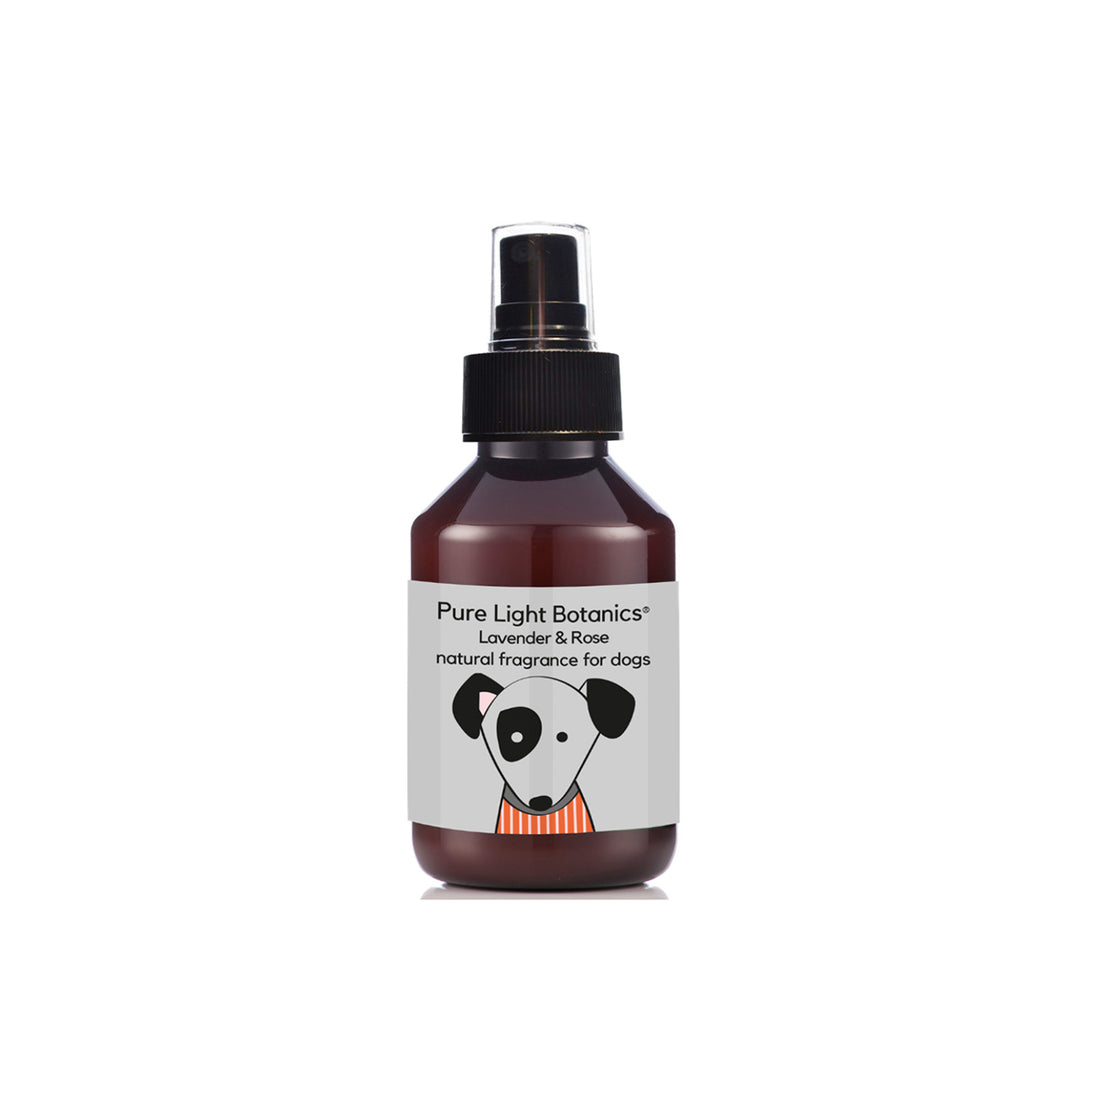 'Pure Paws' Lavender & Rose Natural Fragrance Scent for Dogs 100ml by Pure Light Botanics